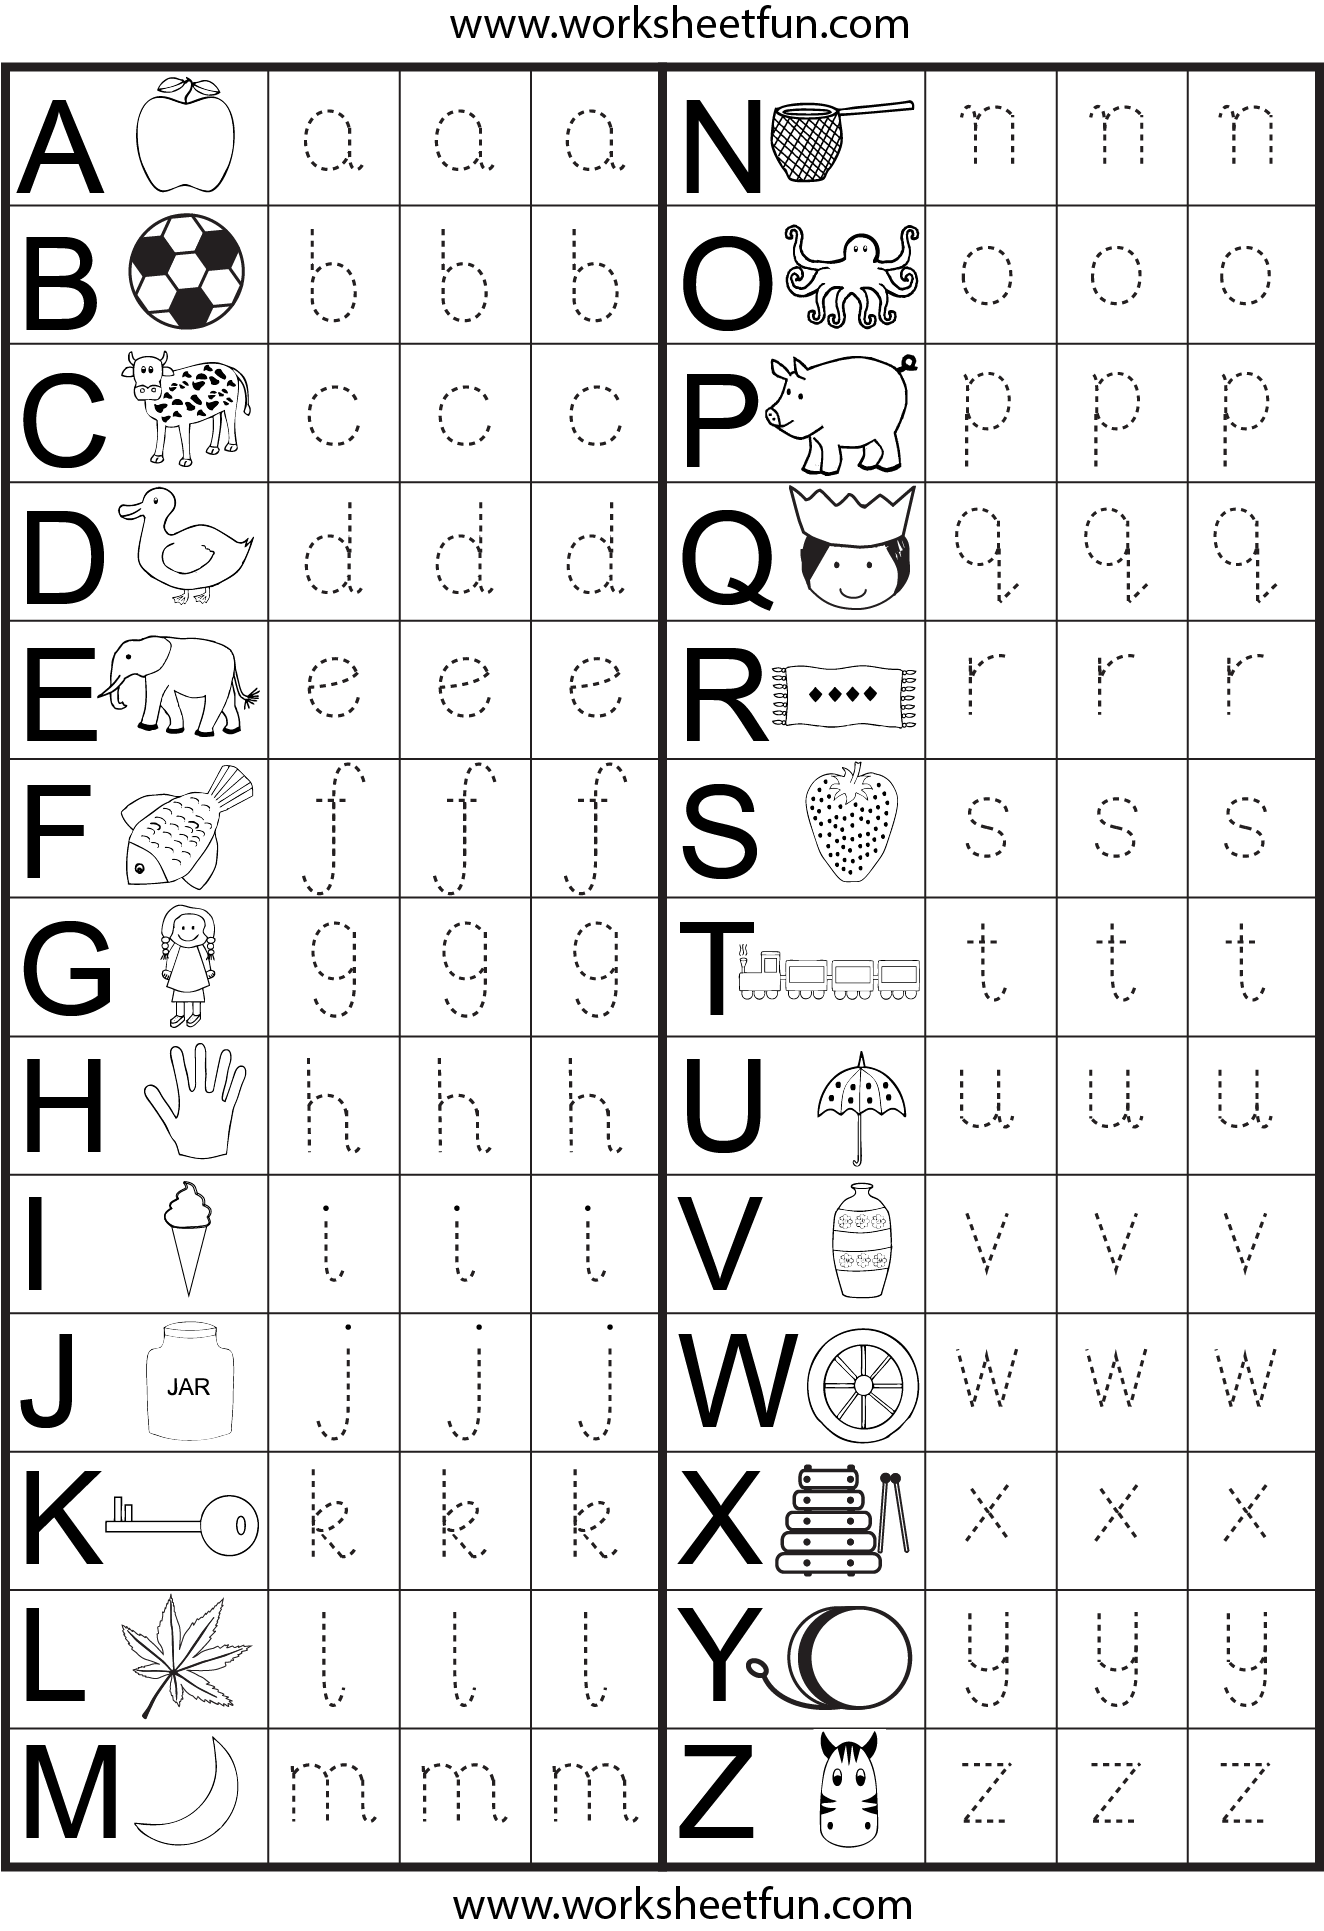 alphabet-tracing-worksheets-a-z-free-printable-for-kids-123-kids-fun